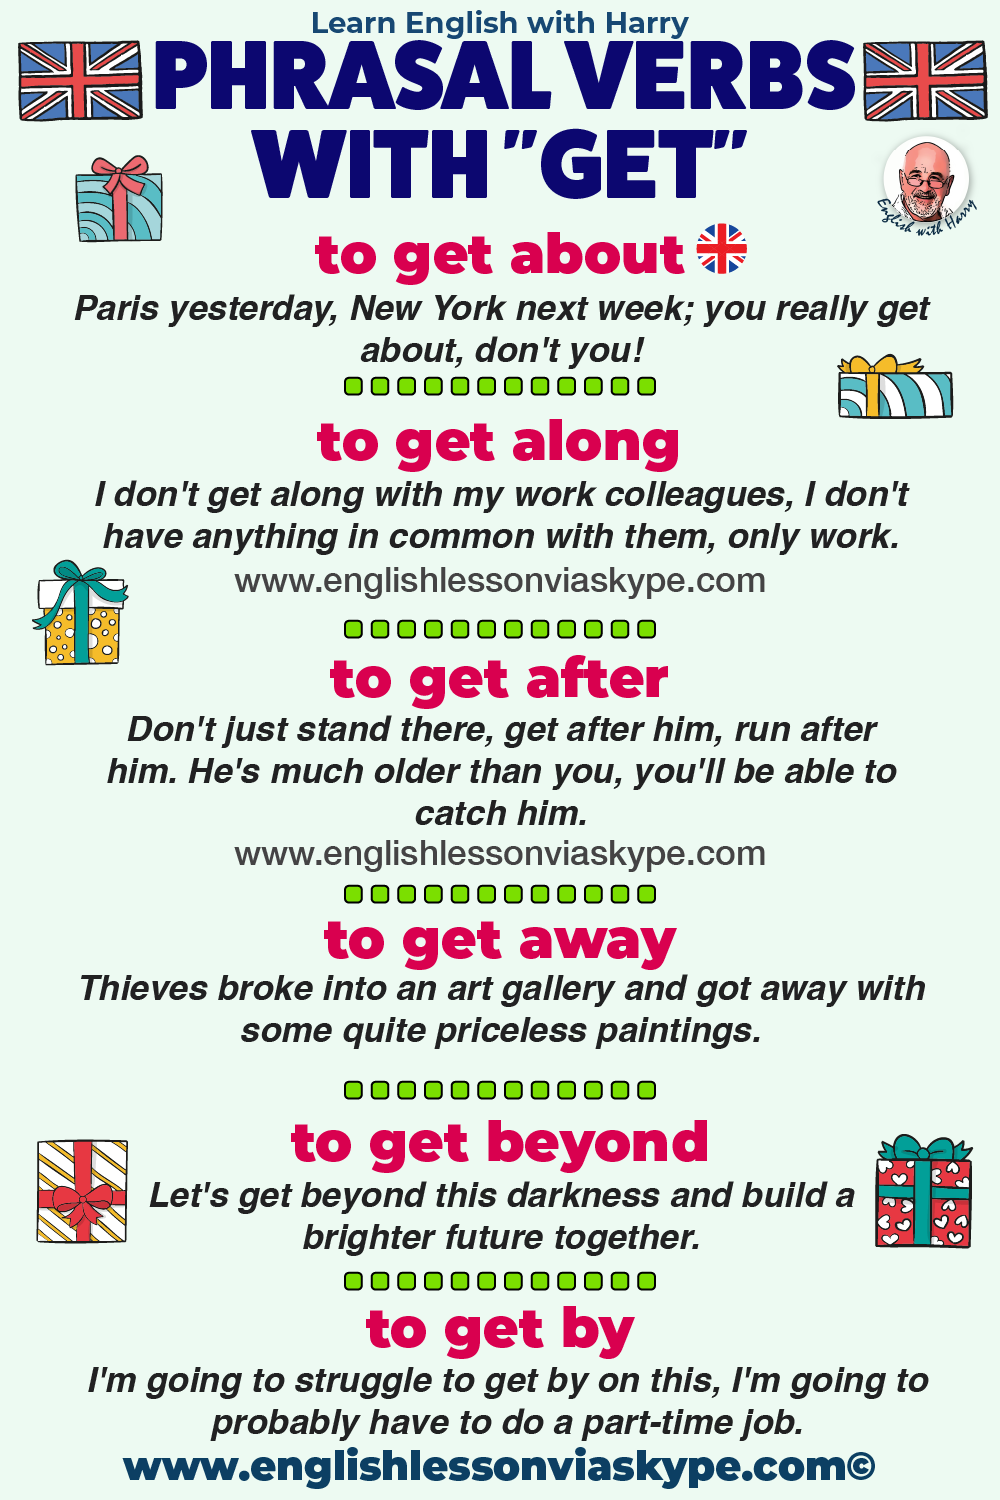 30 Phrasal verbs with get. Advanced English lessons on Zoom and Skype. Improve English speaking and writing skills. #learnenglishnglish